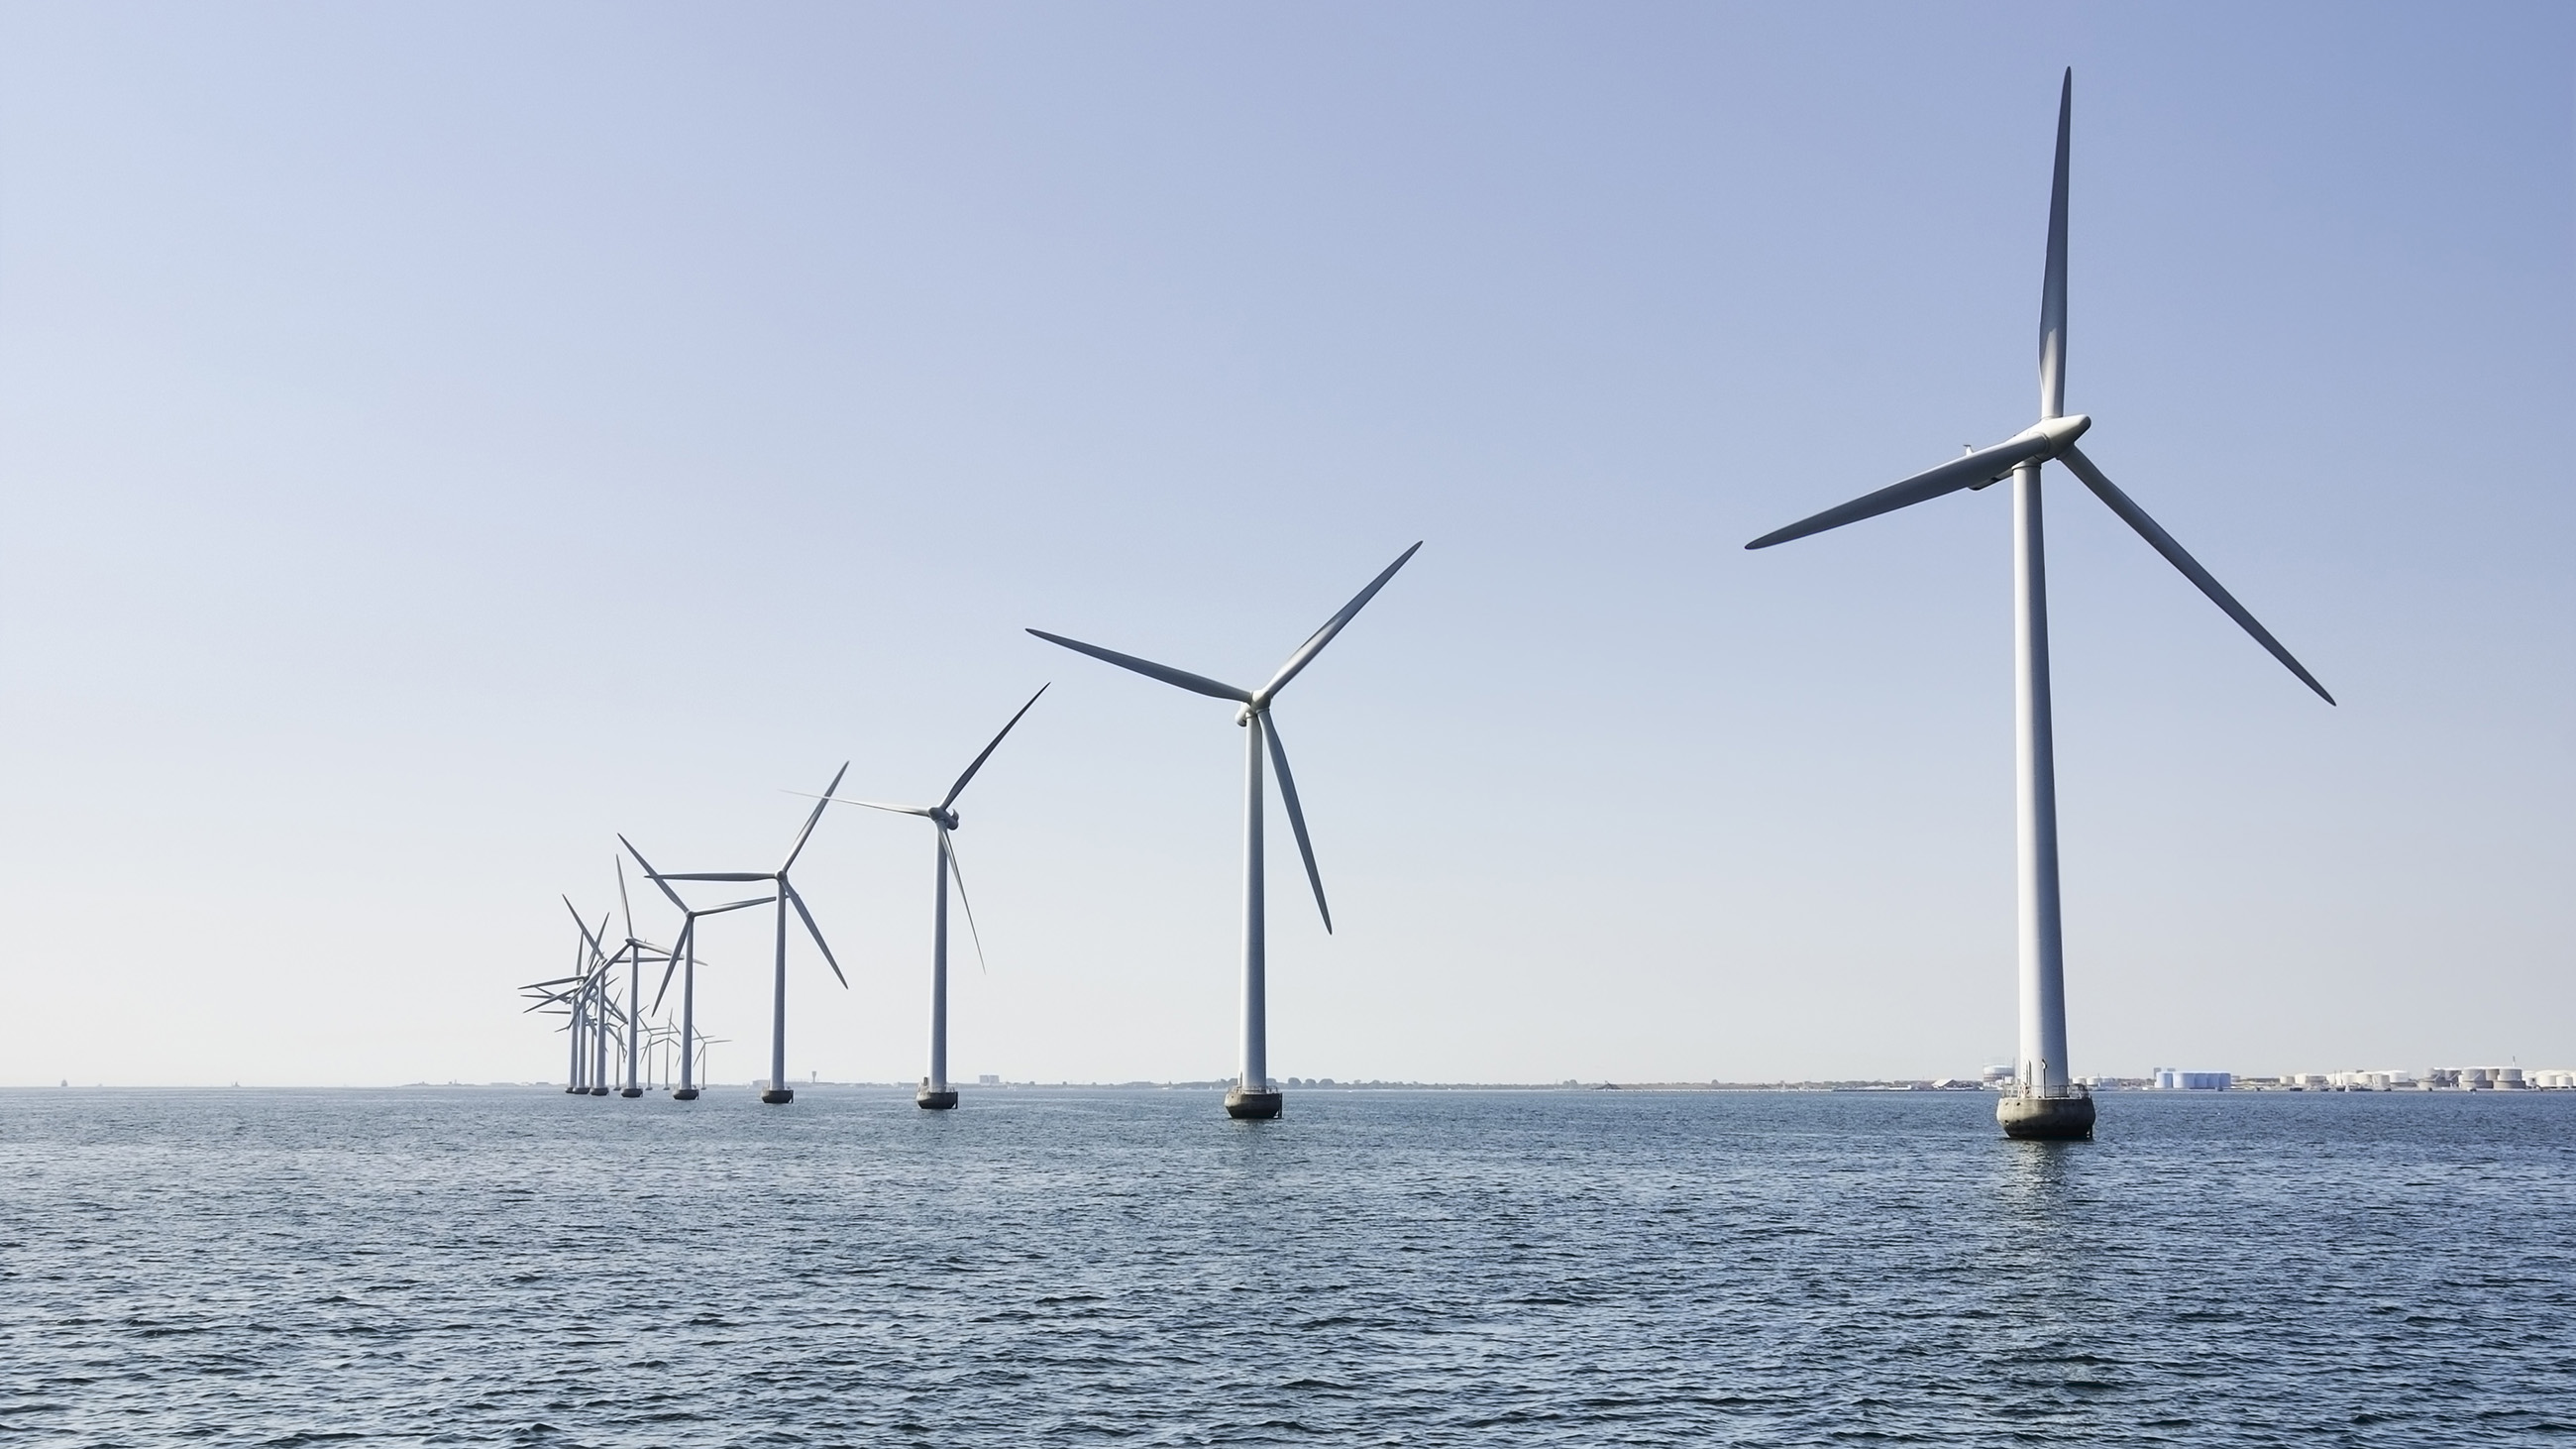 The first off-shore wind turbines in the U.S. were installed off the coast of Rhode Island.